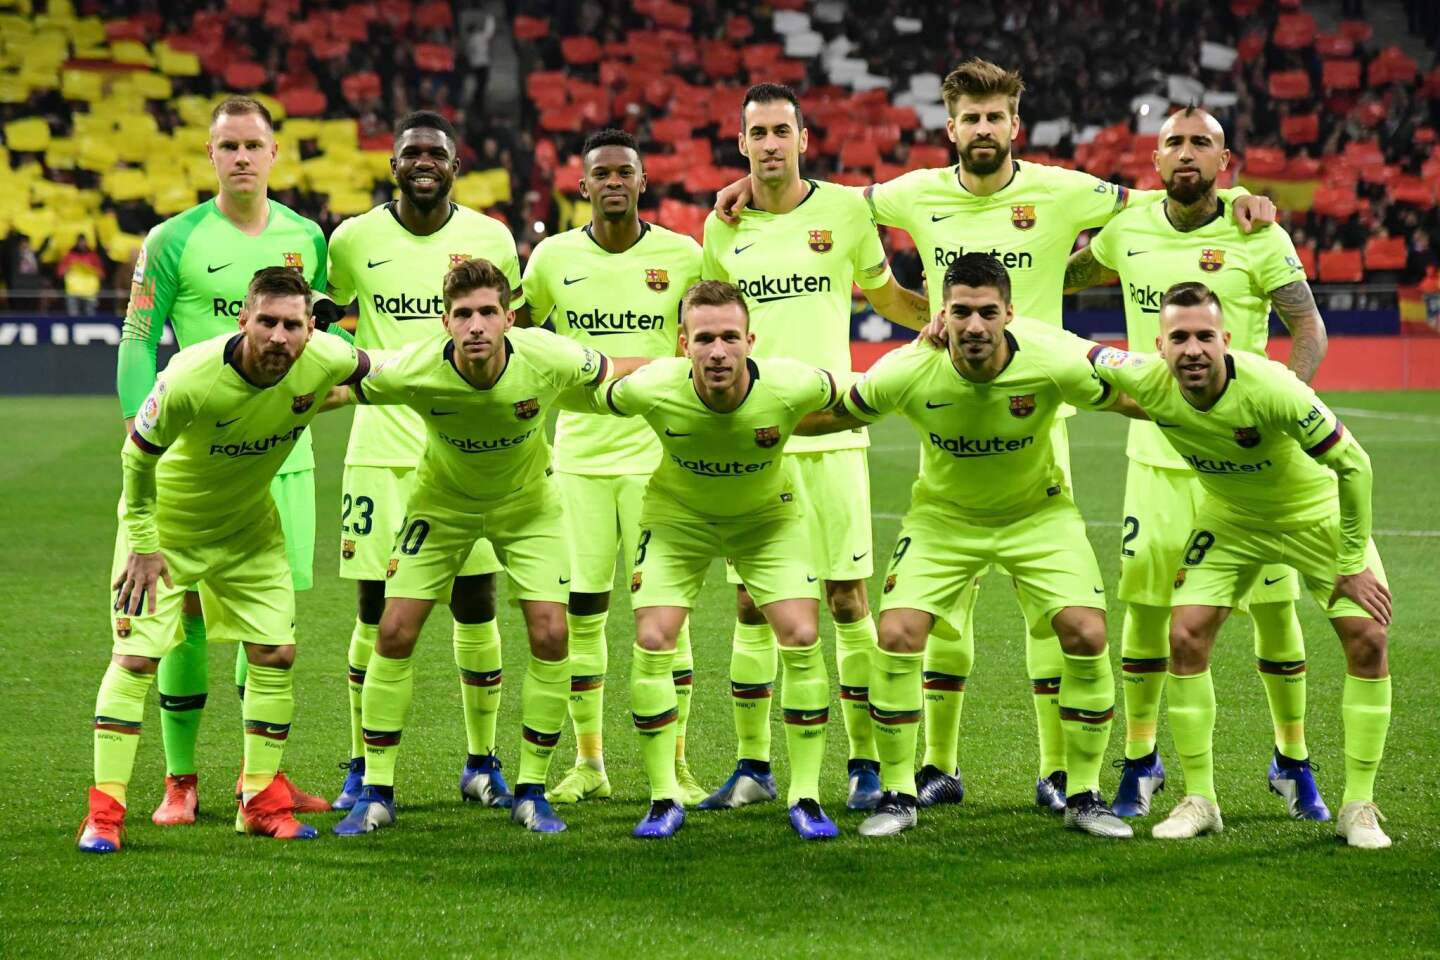 (Back L-R) Barcelona's German goalkeeper Marc-Andre Ter Stegen, Barcelona's French defender Samuel Umtiti, Barcelona's Portuguese defender Nelson Semedo, Barcelona's Spanish midfielder Sergio Busquets, Barcelona's Spanish defender Gerard Pique, Barcelona's Chilean midfielder Arturo Vidal, (L-R) Barcelona's Argentinian forward Lionel Messi, Barcelona's Spanish midfielder Sergi Roberto, Barcelona's Brazilian midfielder Arthur, Barcelona's Uruguayan forward Luis Suarez and Barcelona's Spanish defender Jordi Alba pose for a group picture ahead of the Spanish league football match between Club Atletico de Madrid and FC Barcelona at the Wanda Metropolitano stadium in Madrid on November 24, 2018. (Photo by JAVIER SORIANO / AFP)JAVIER SORIANO/AFP/Getty Images ** OUTS - ELSENT, FPG, CM - OUTS * NM, PH, VA if sourced by CT, LA or MoD **